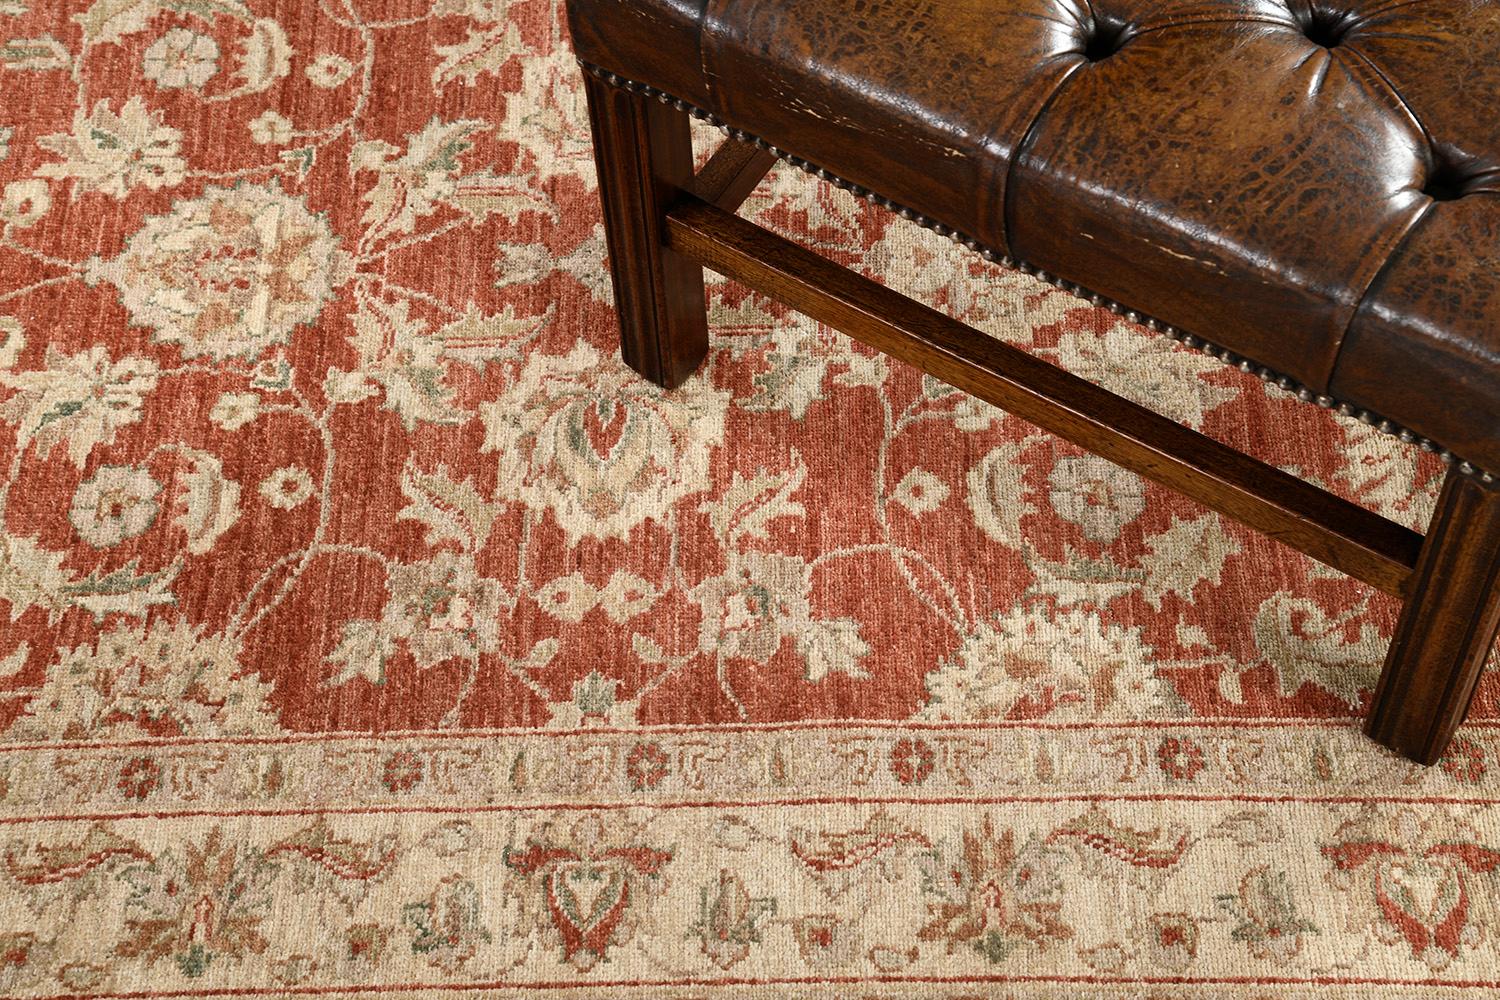 This enchanting timeless Sultanabad Runner has symmetrical patterns that make the rug unique. A one of a kind rug that makes your interior more fascinating. Neutral tones feature even the smallest details of the patterns and motifs that match with